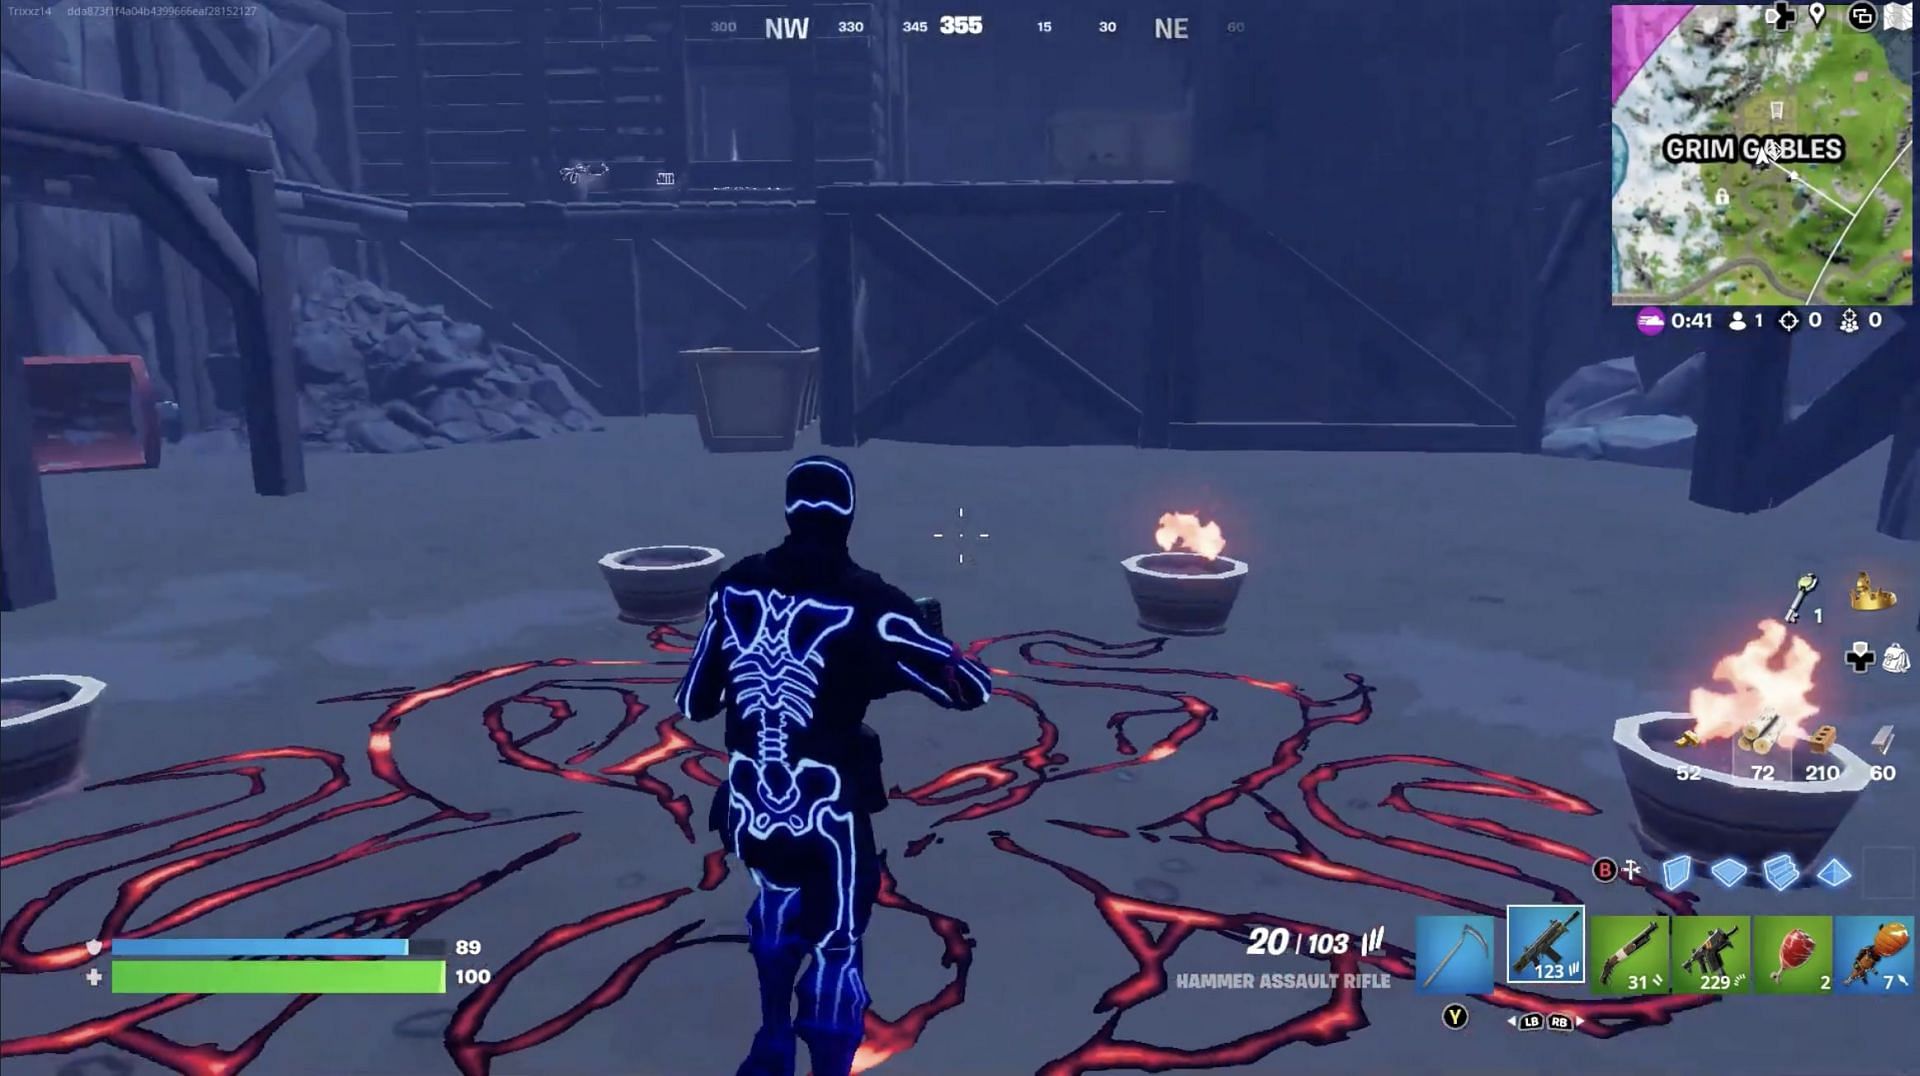 The boss can be summoned here (Image via trixxz14 on YouTube)